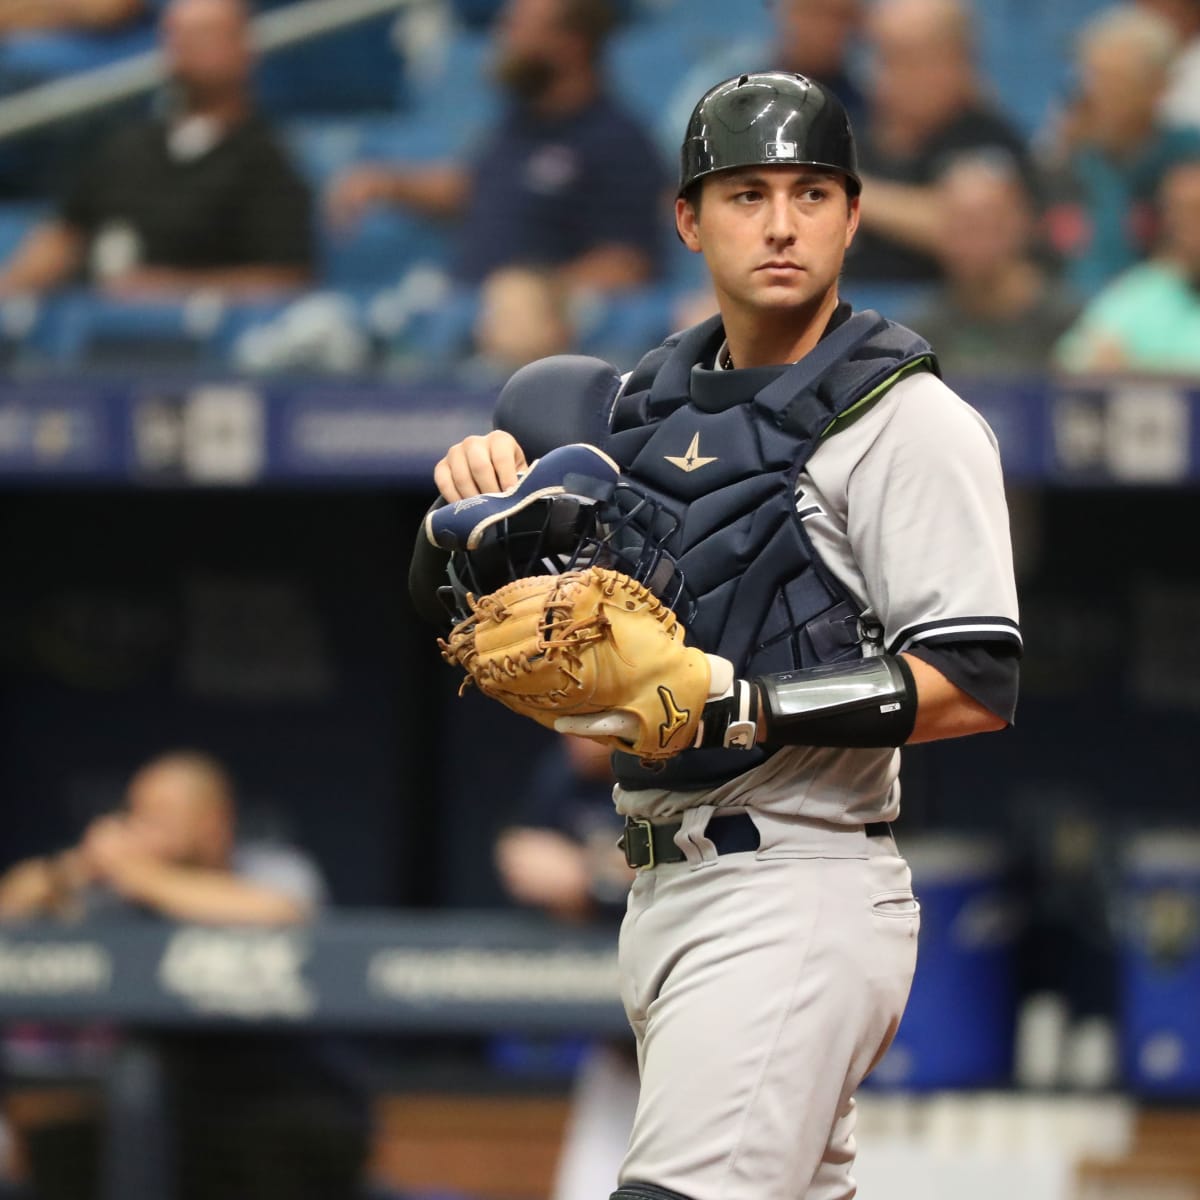 The Yankees signed veteran catchers for more than just depth